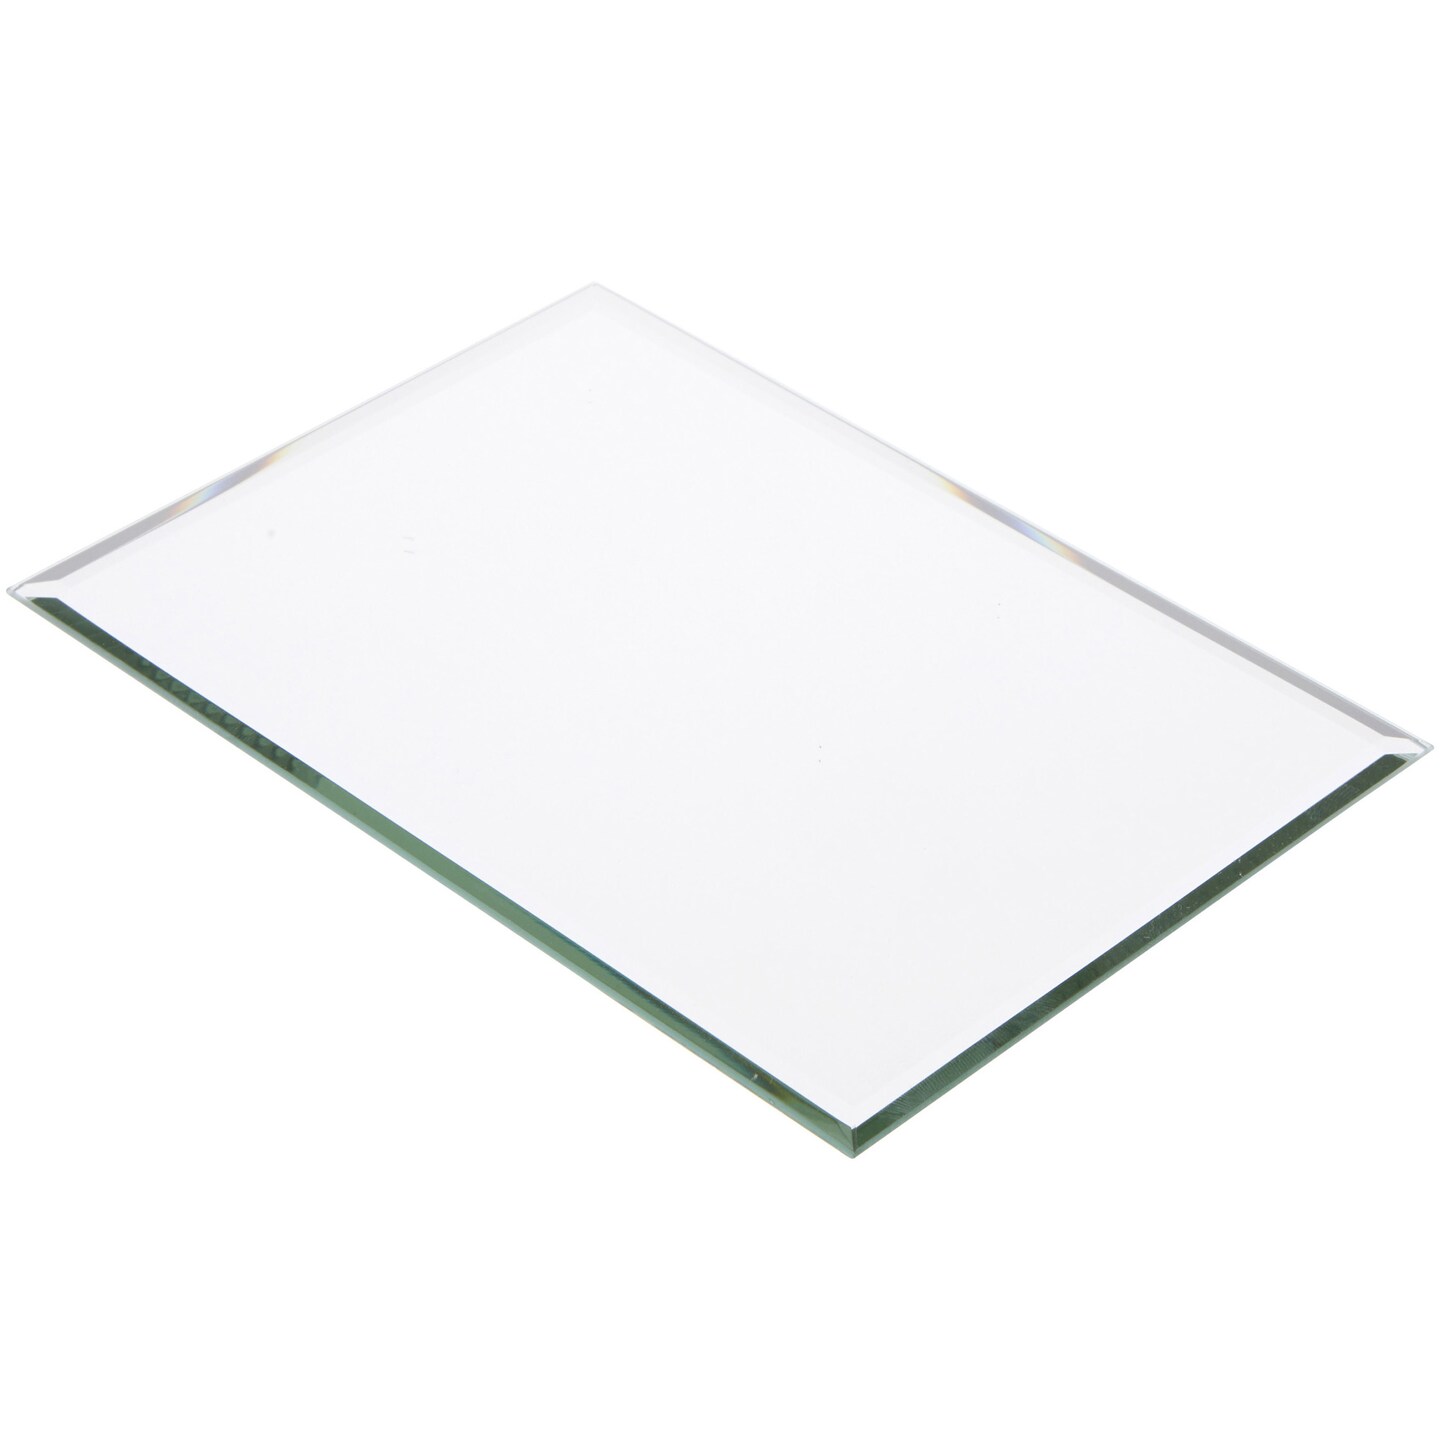 Plymor Rectangle 3mm Beveled Glass Mirror, 5 inch x 7 inch